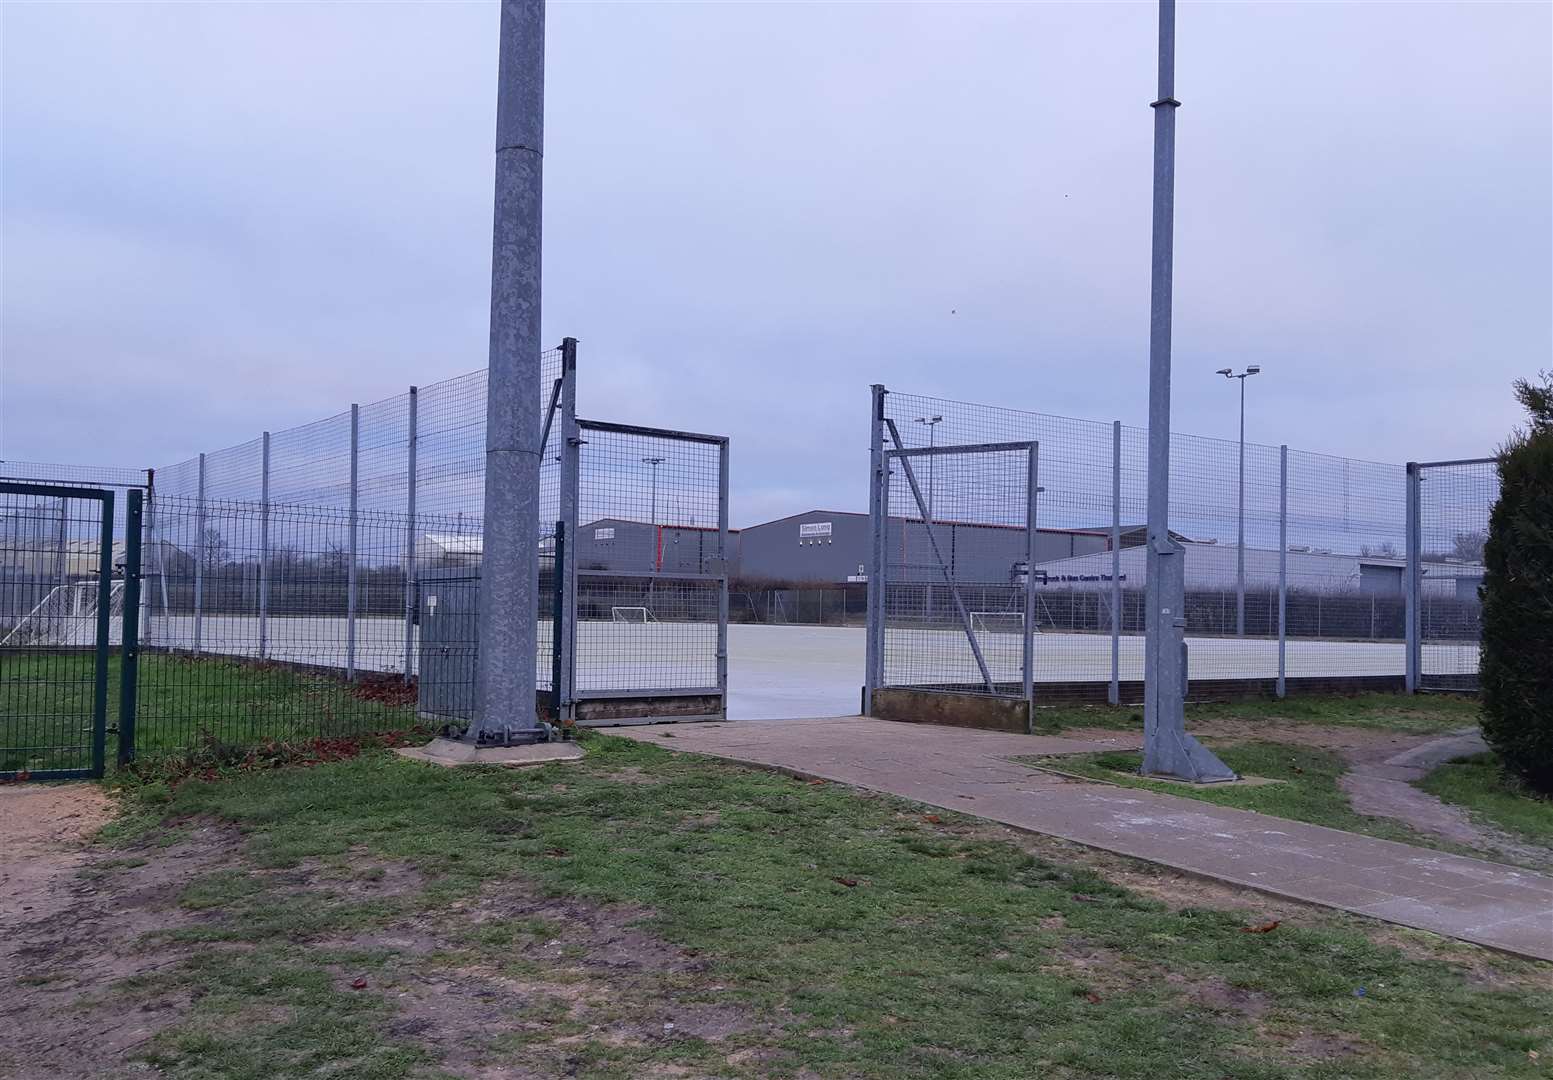 The pitches at Breckland Leisure centre. Picture: Kev Hurst